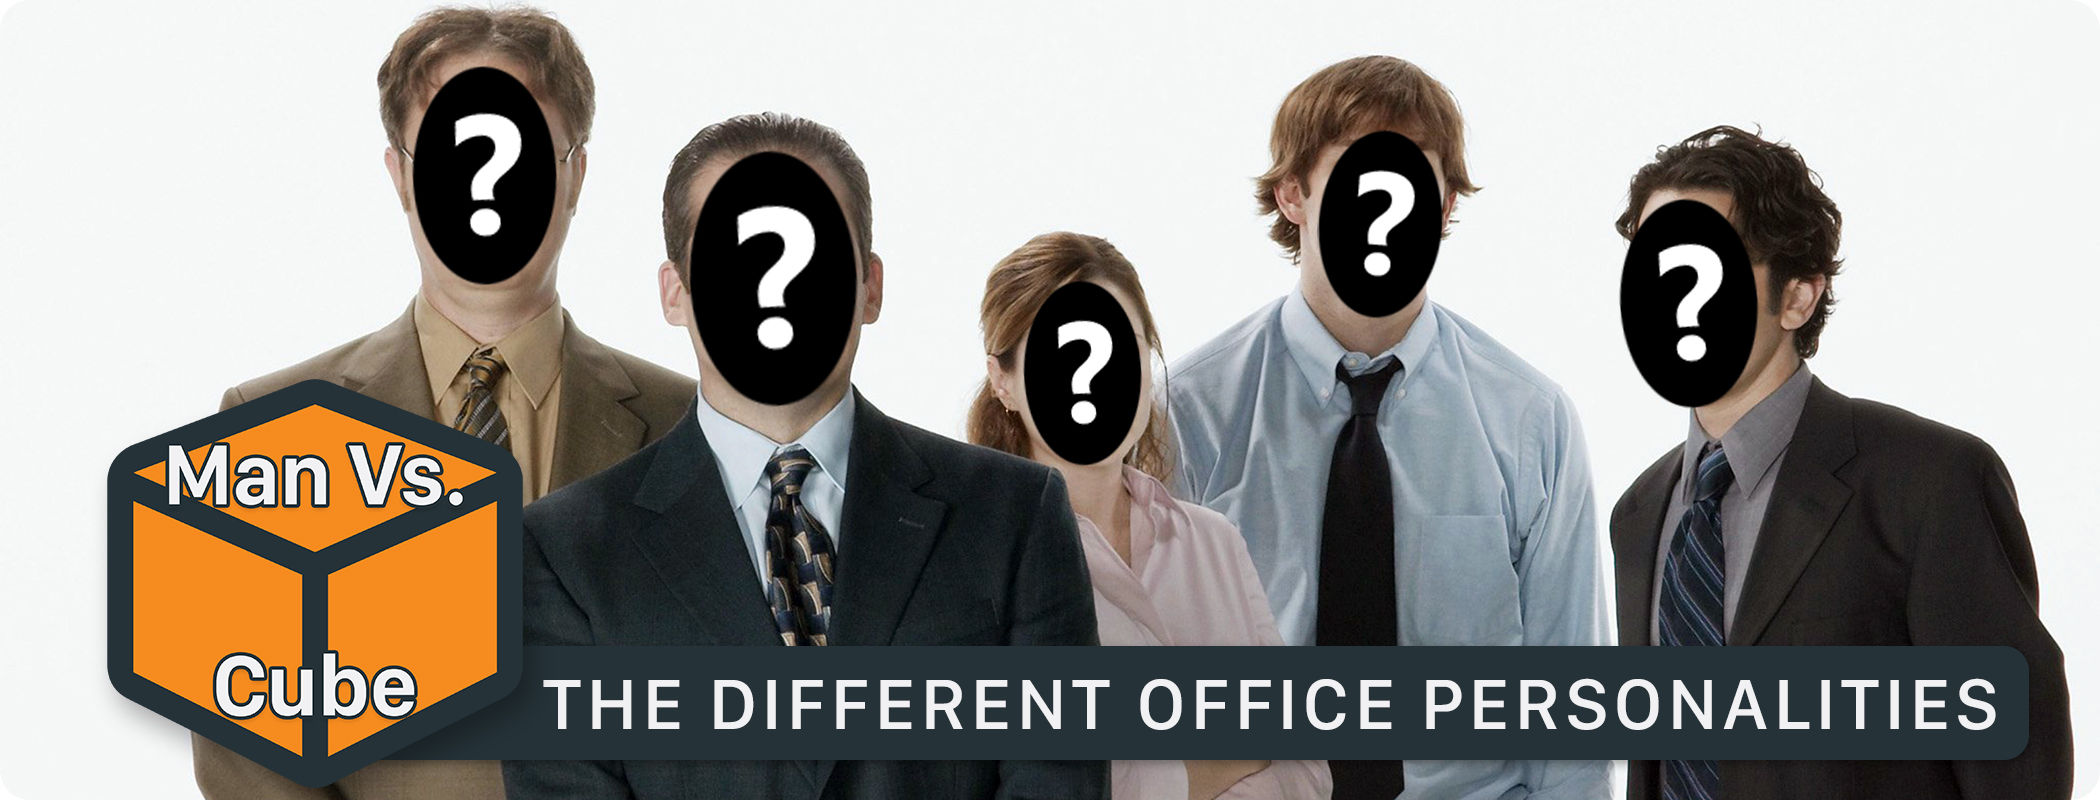 Man vs. Cube: The Different Office Personalities